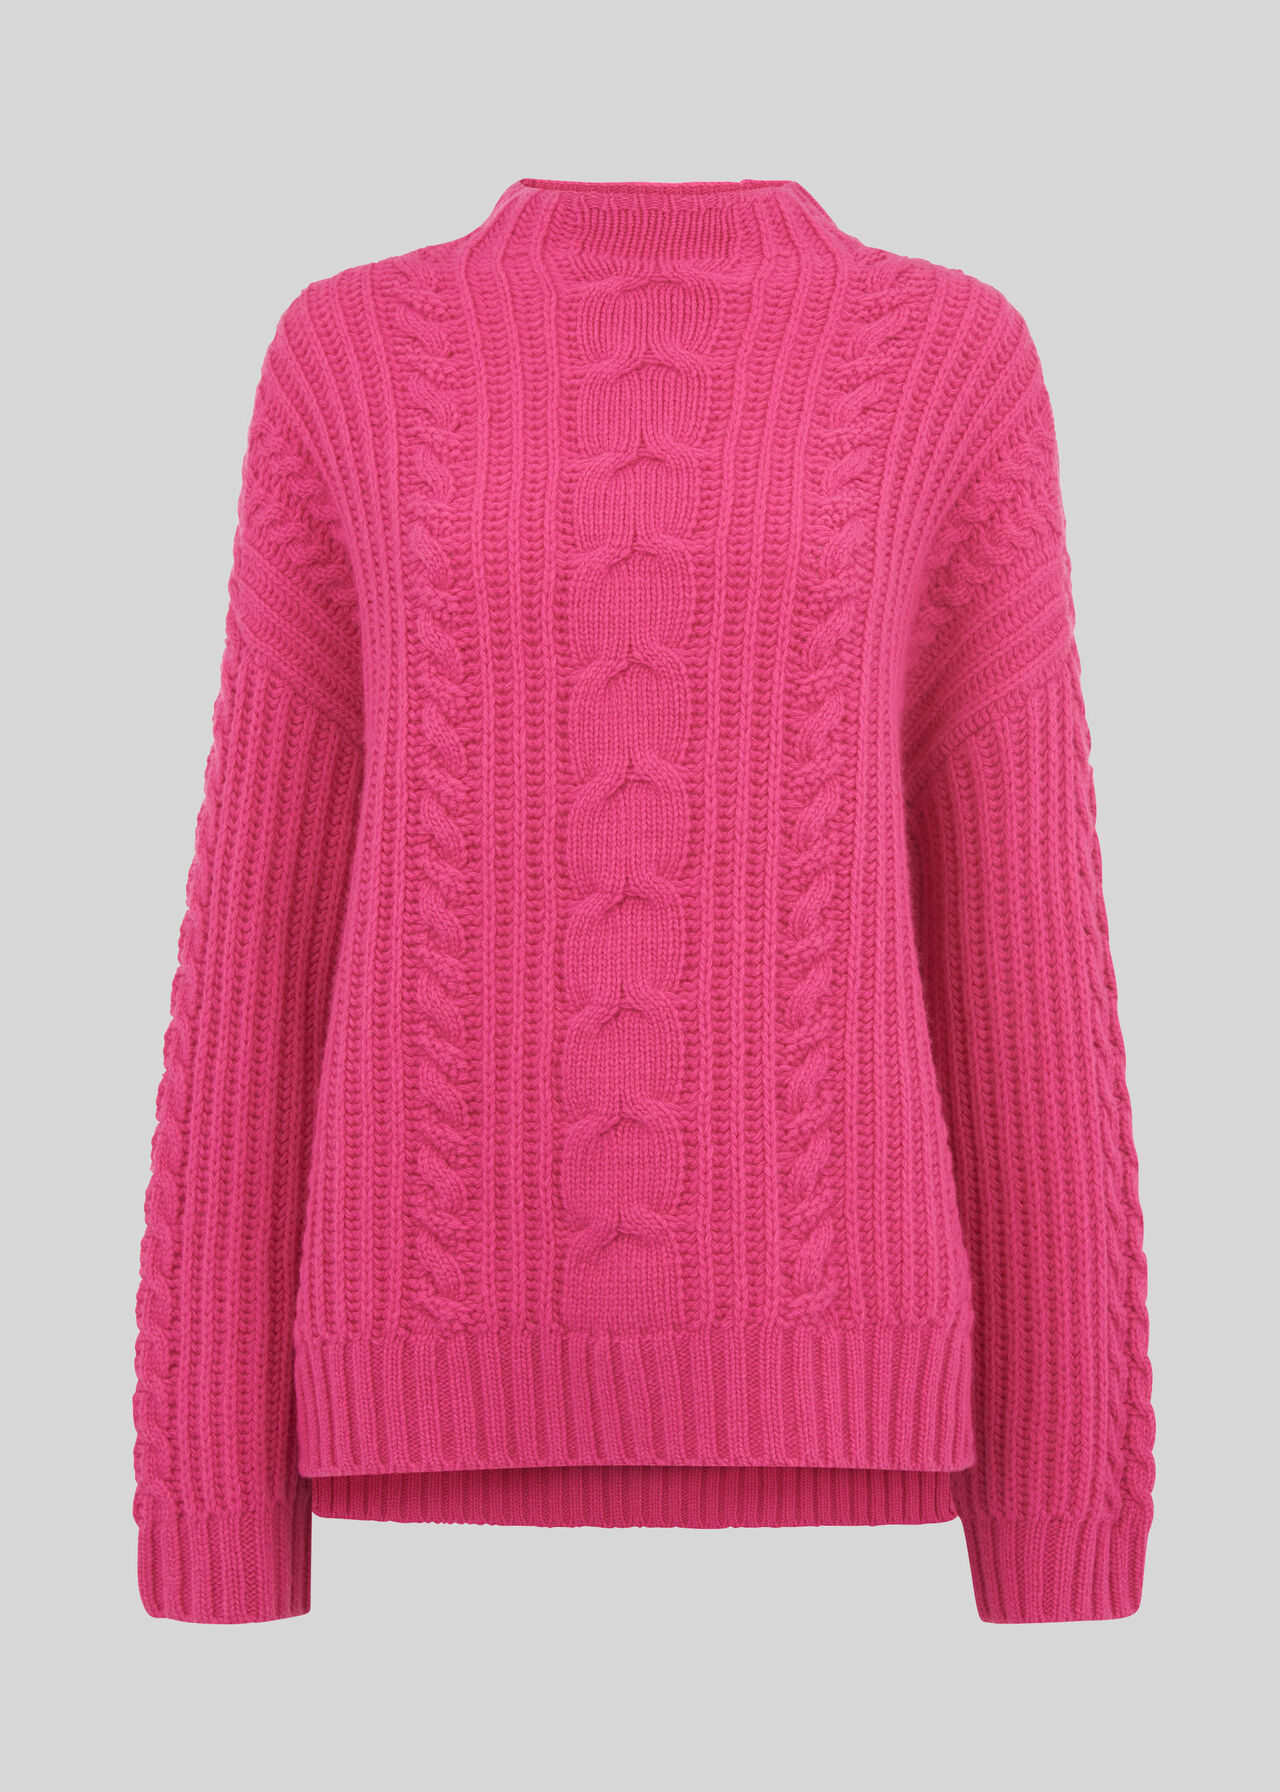 Pink Oversized Chunky Cable Sweater | WHISTLES